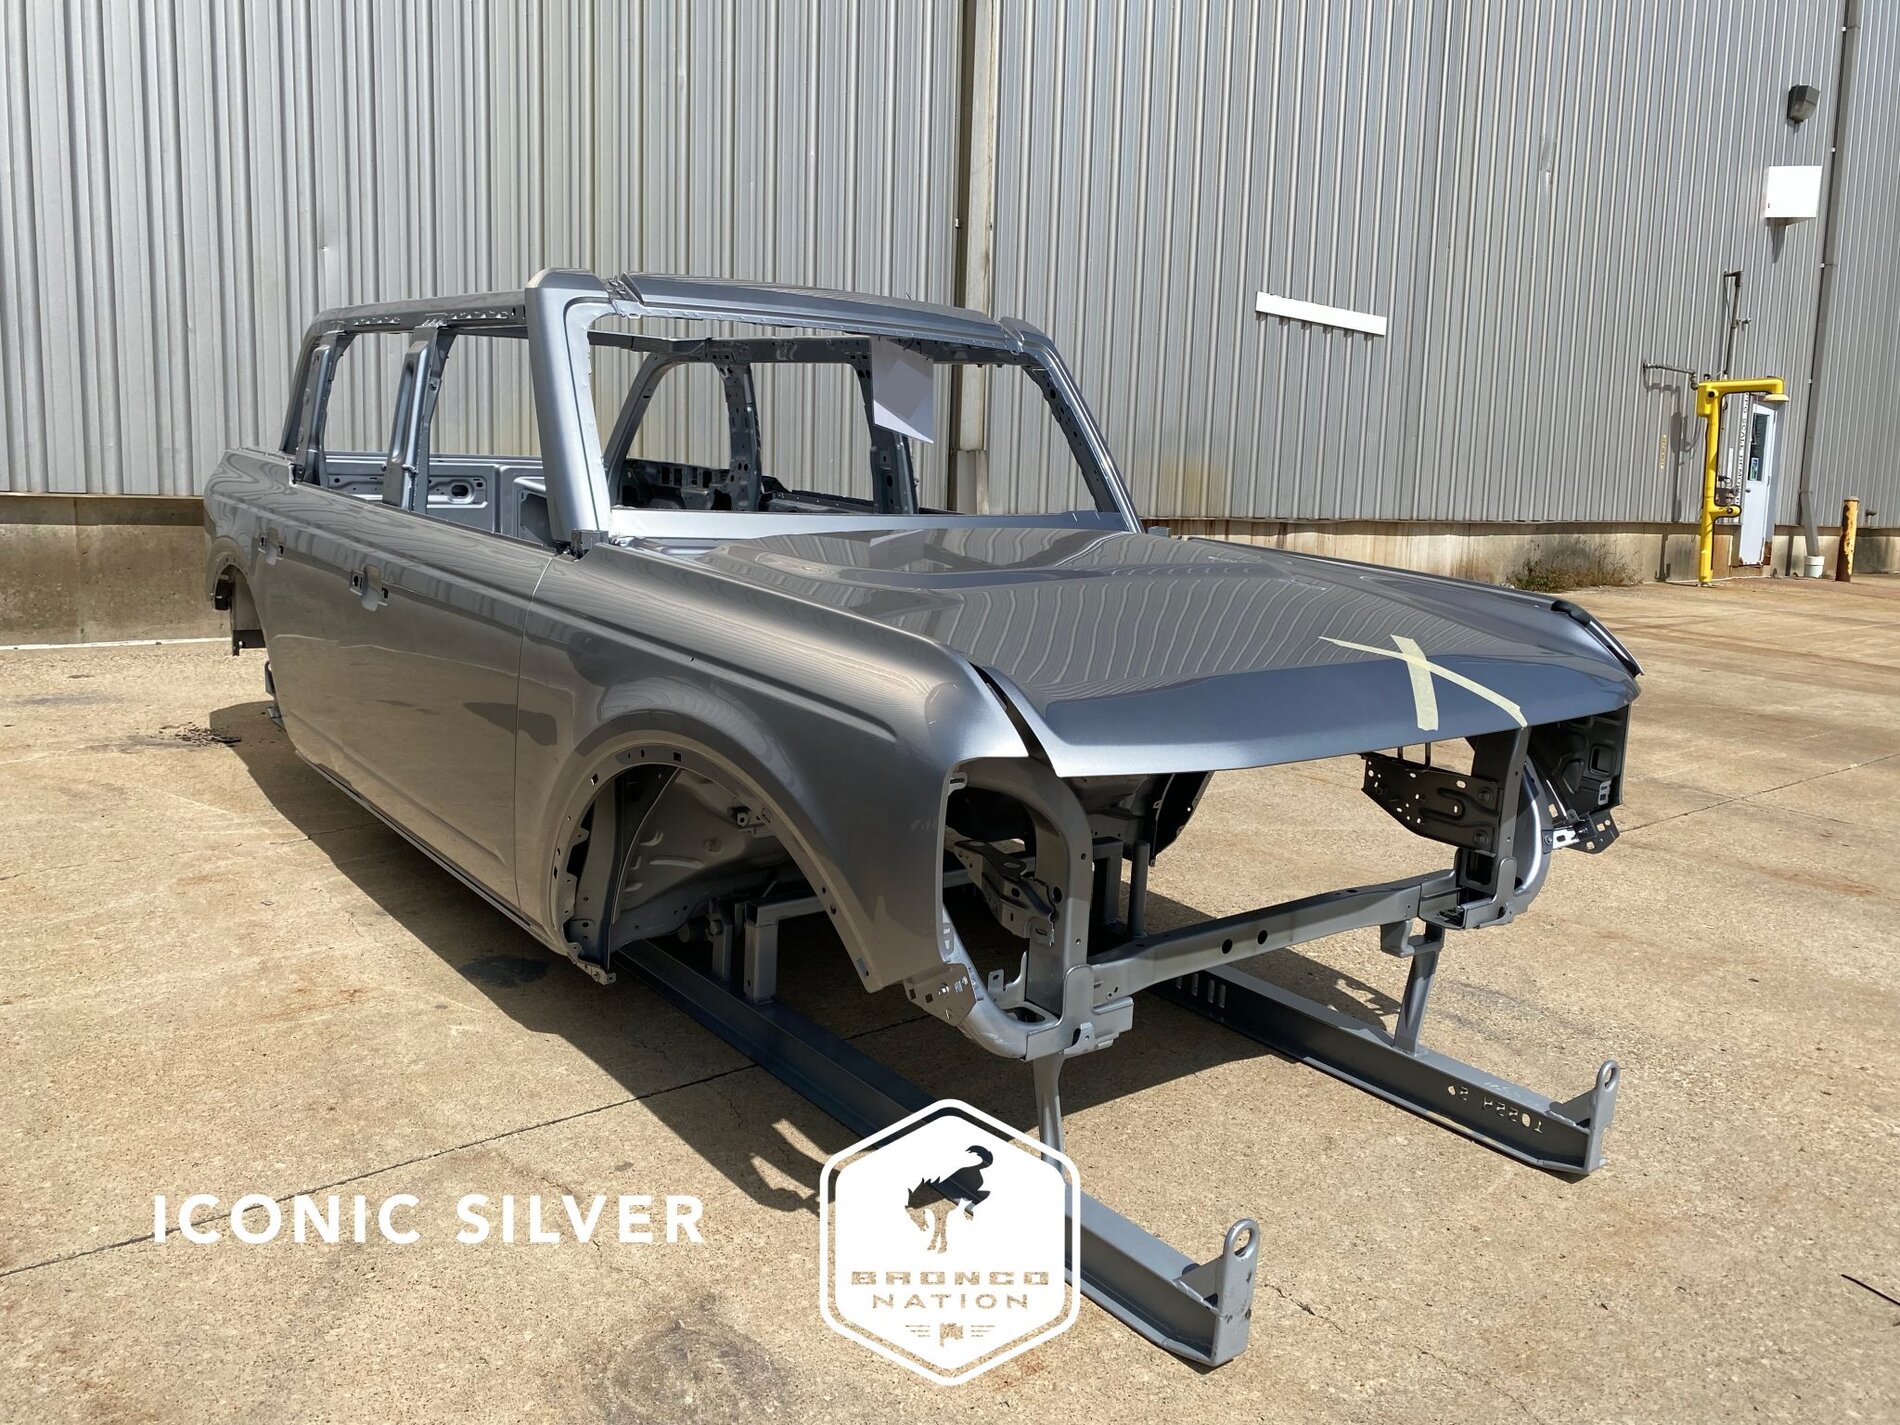 Ford Bronco Iconic Silver Paint Thread 2021 Bronco Iconic Silver painted body sample